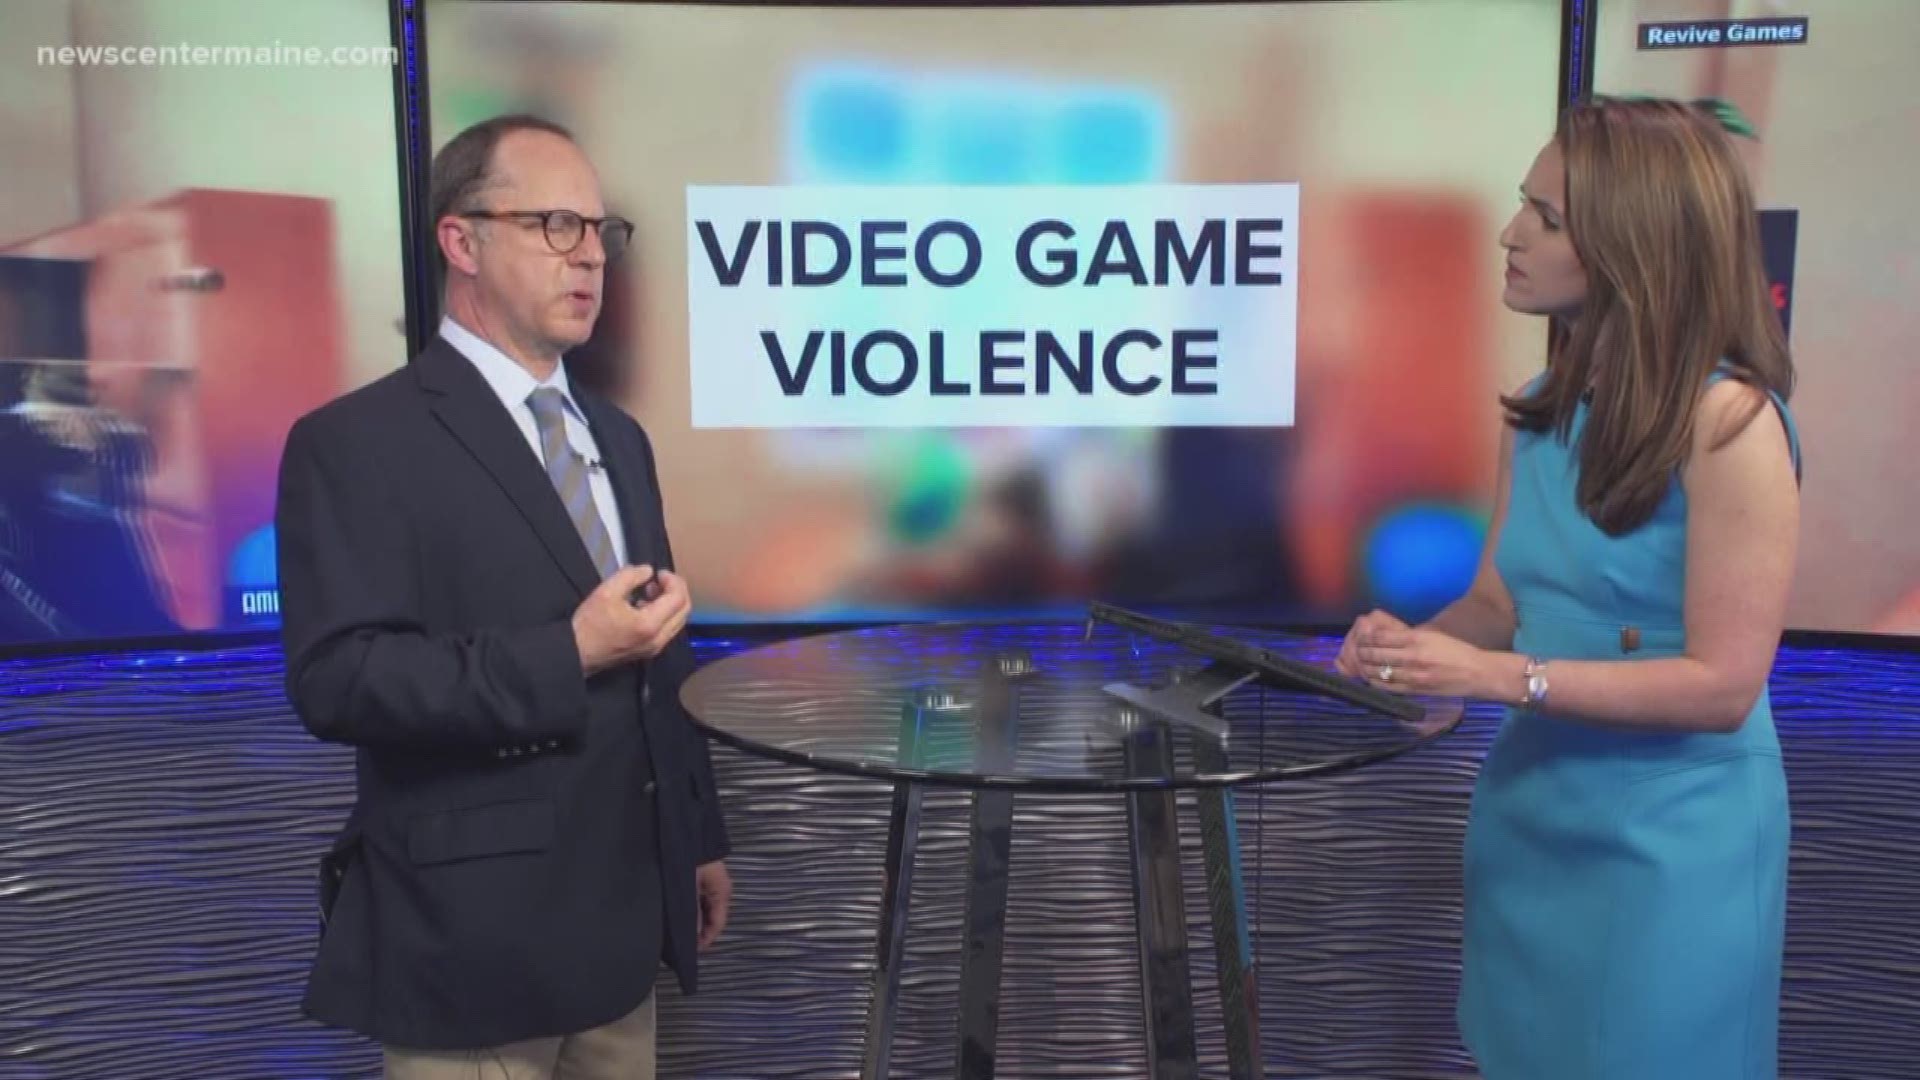 NOW- Dr Jeffrey Barkin talks about the active shooter game